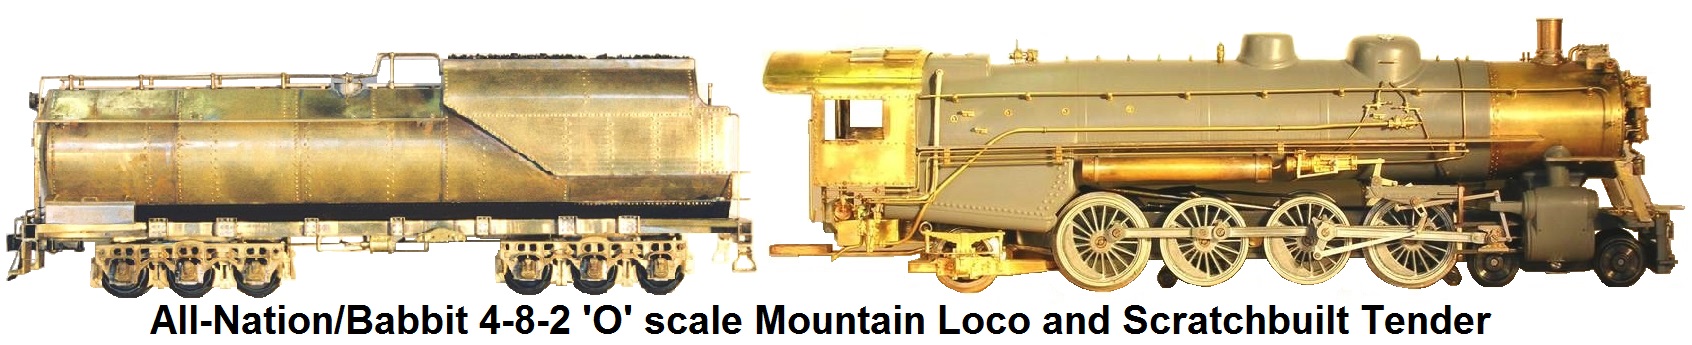 All-Nation Babbit 4-8-2 'O' scale Mountain Loco and Scratchbuilt tender